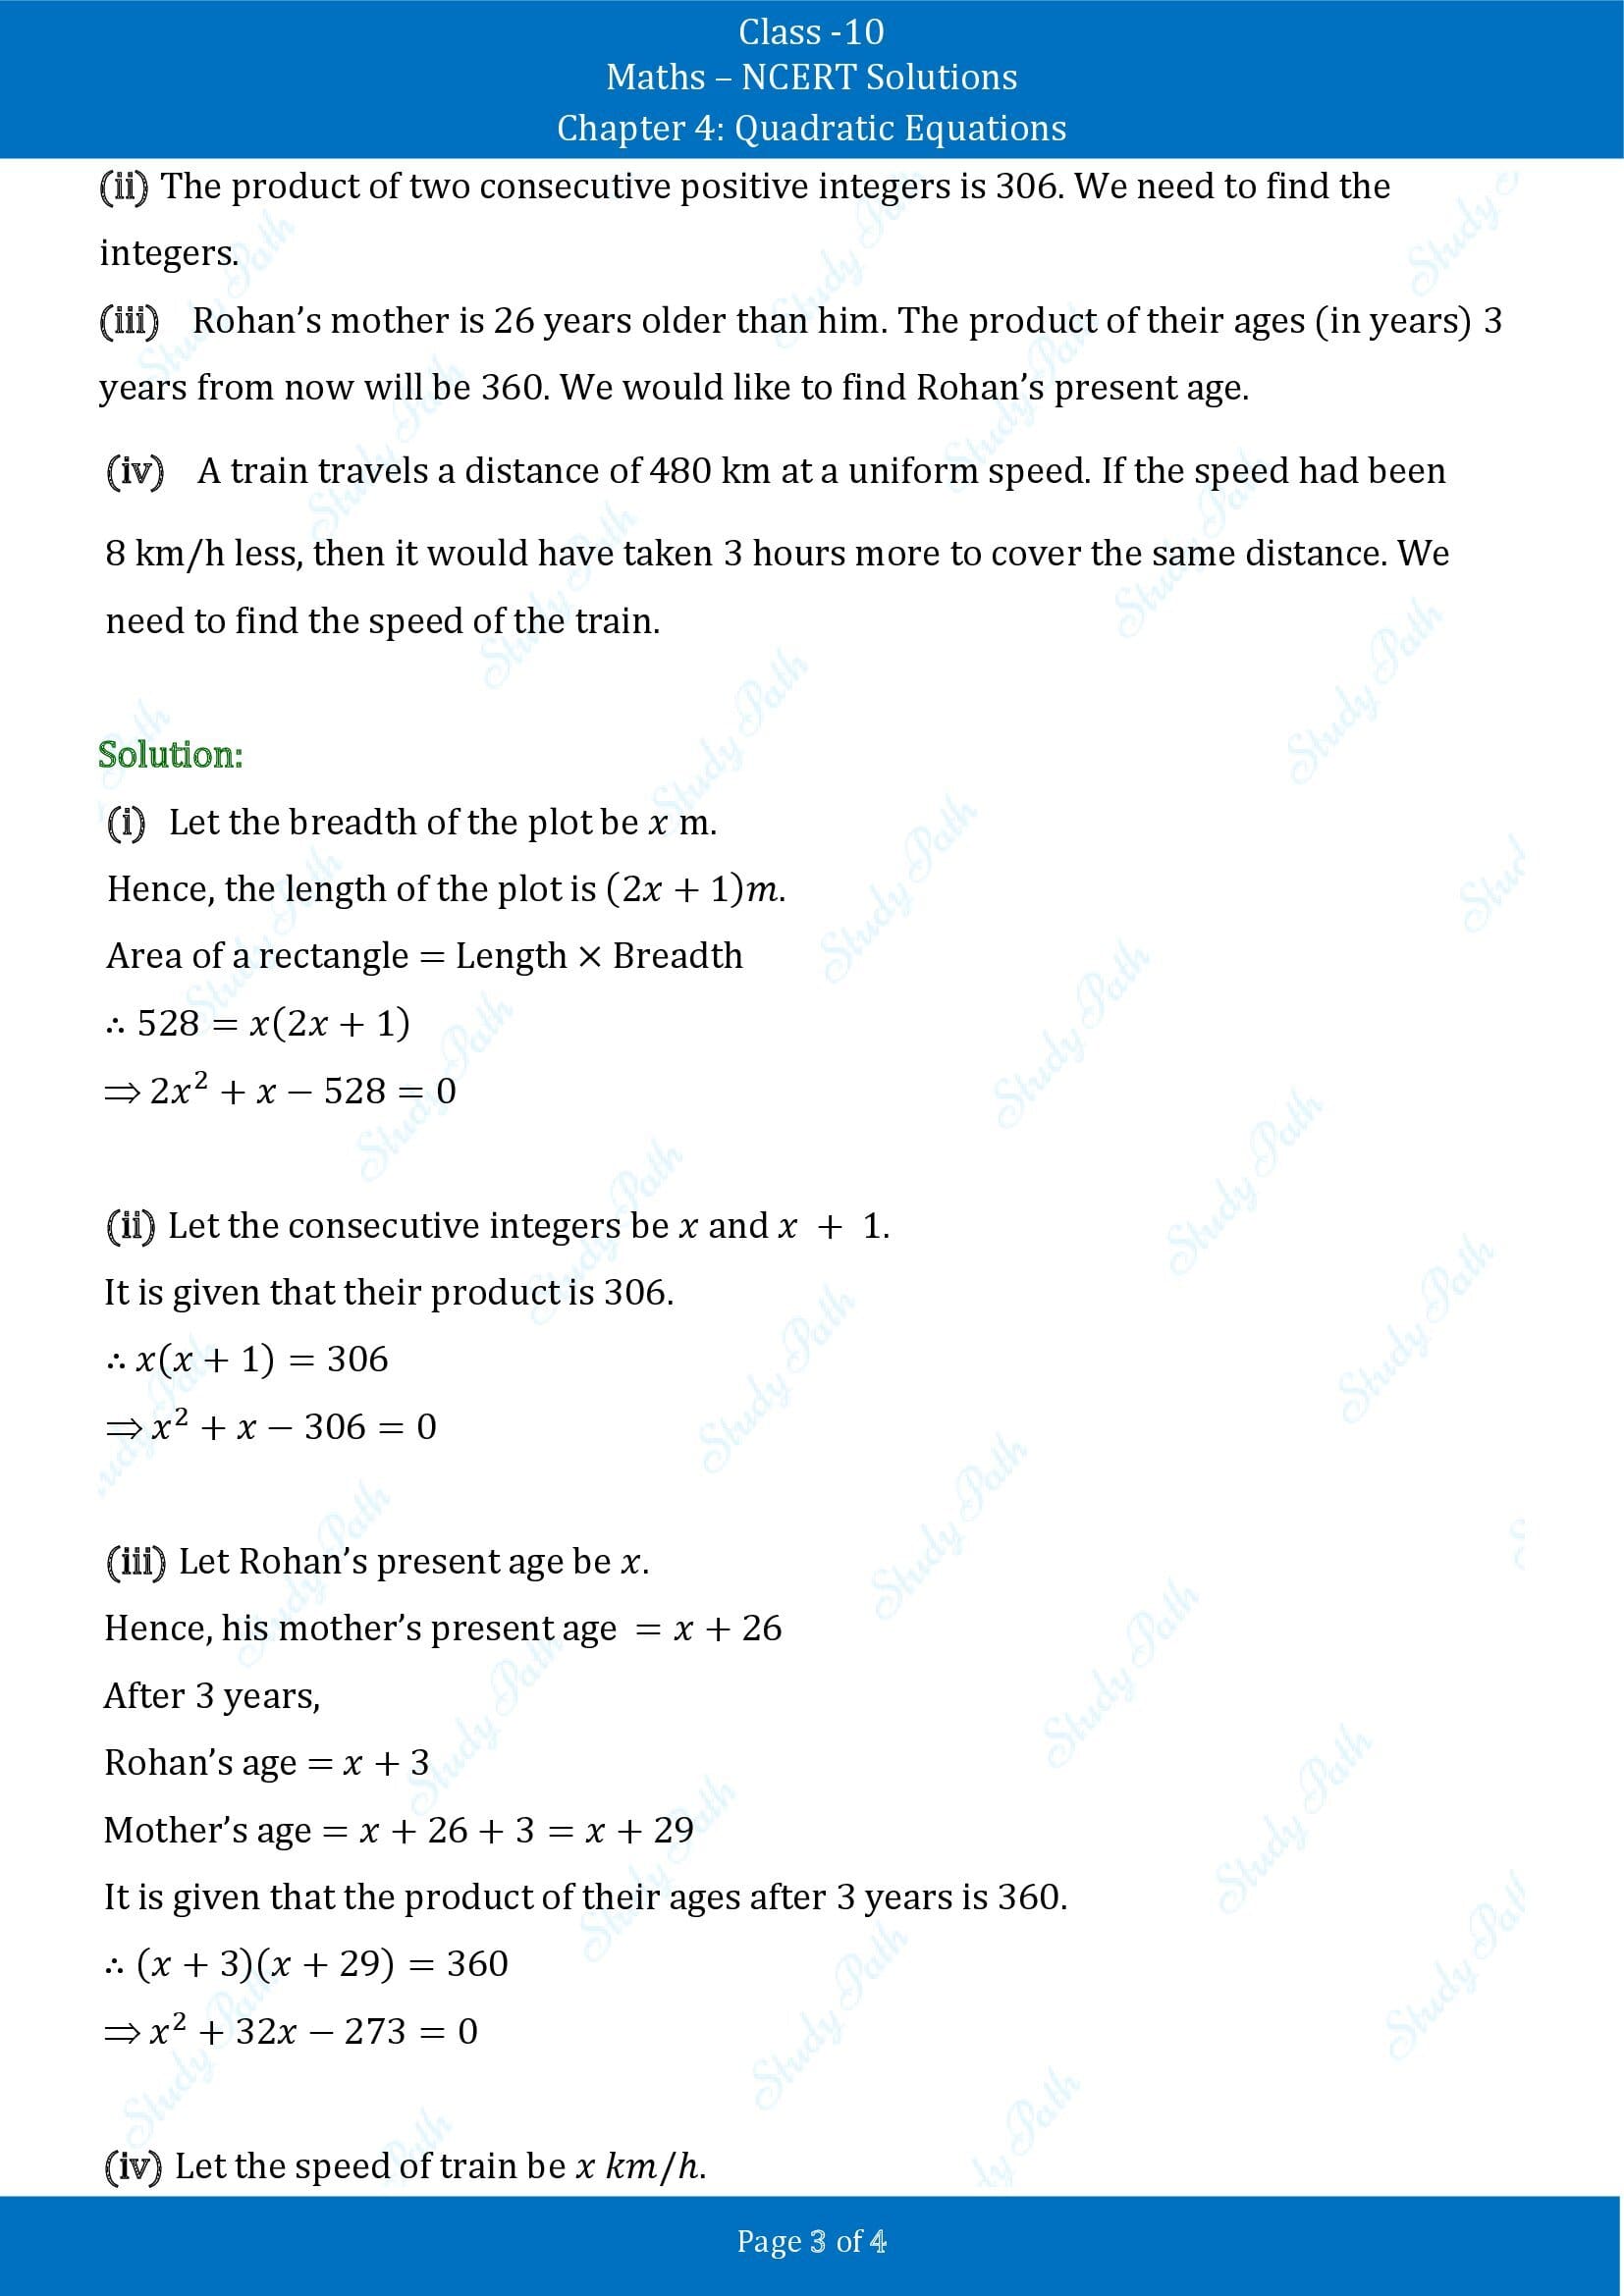 NCERT Solutions for Class 10 Maths Chapter 4 Quadratic Equations Exercise 4.1 00003